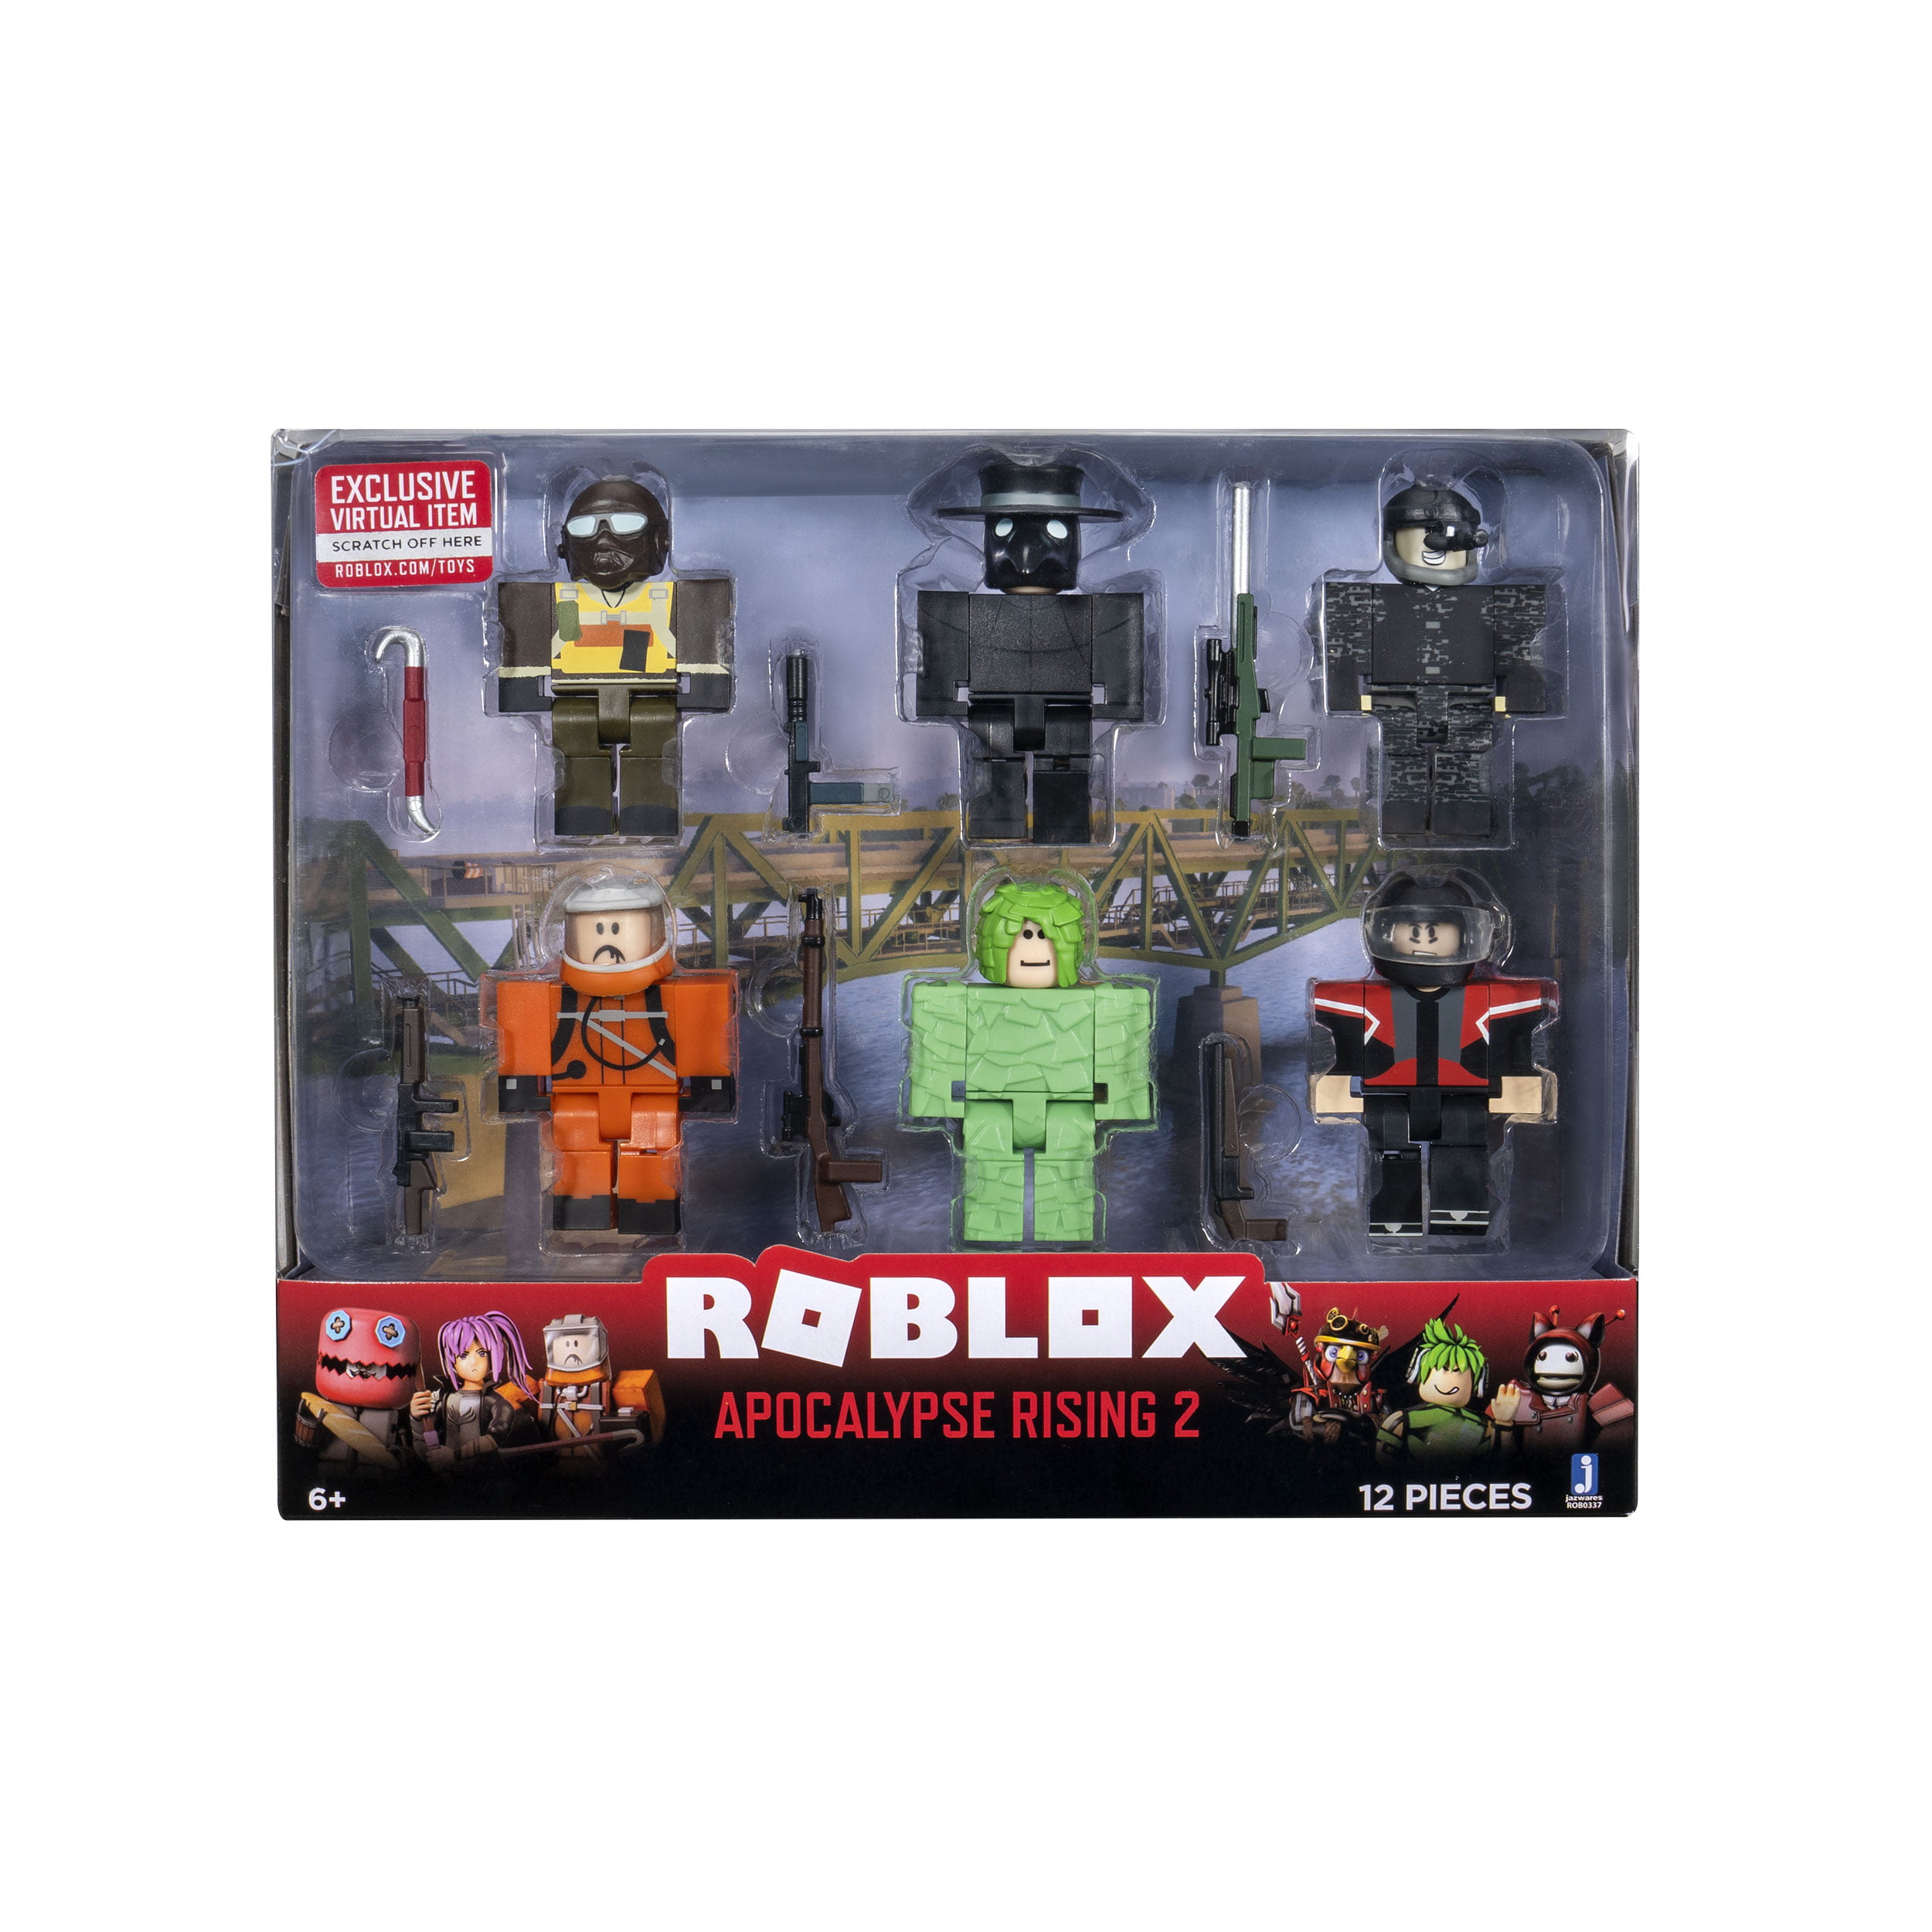 Roblox Action Collection Apocalypse Rising 2 Six Figure Pack Includes Exclusive Virtual Item Walmart Com Walmart Com - map de apocalypse rising roblox